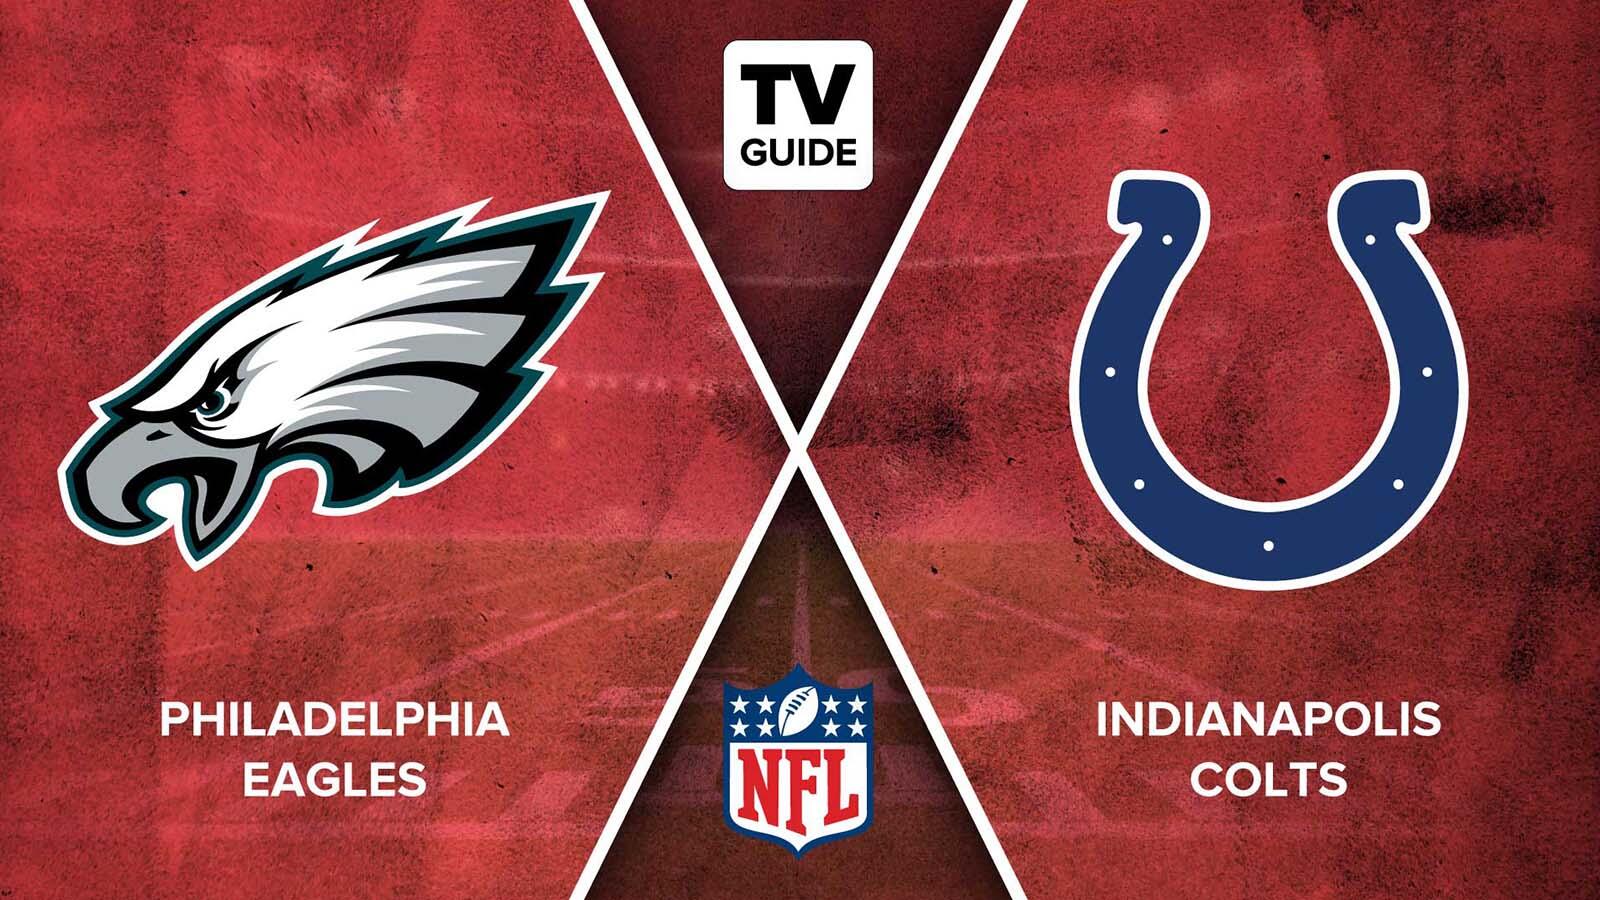 How to Watch Eagles vs. Colts Live on 11/20 - TV Guide